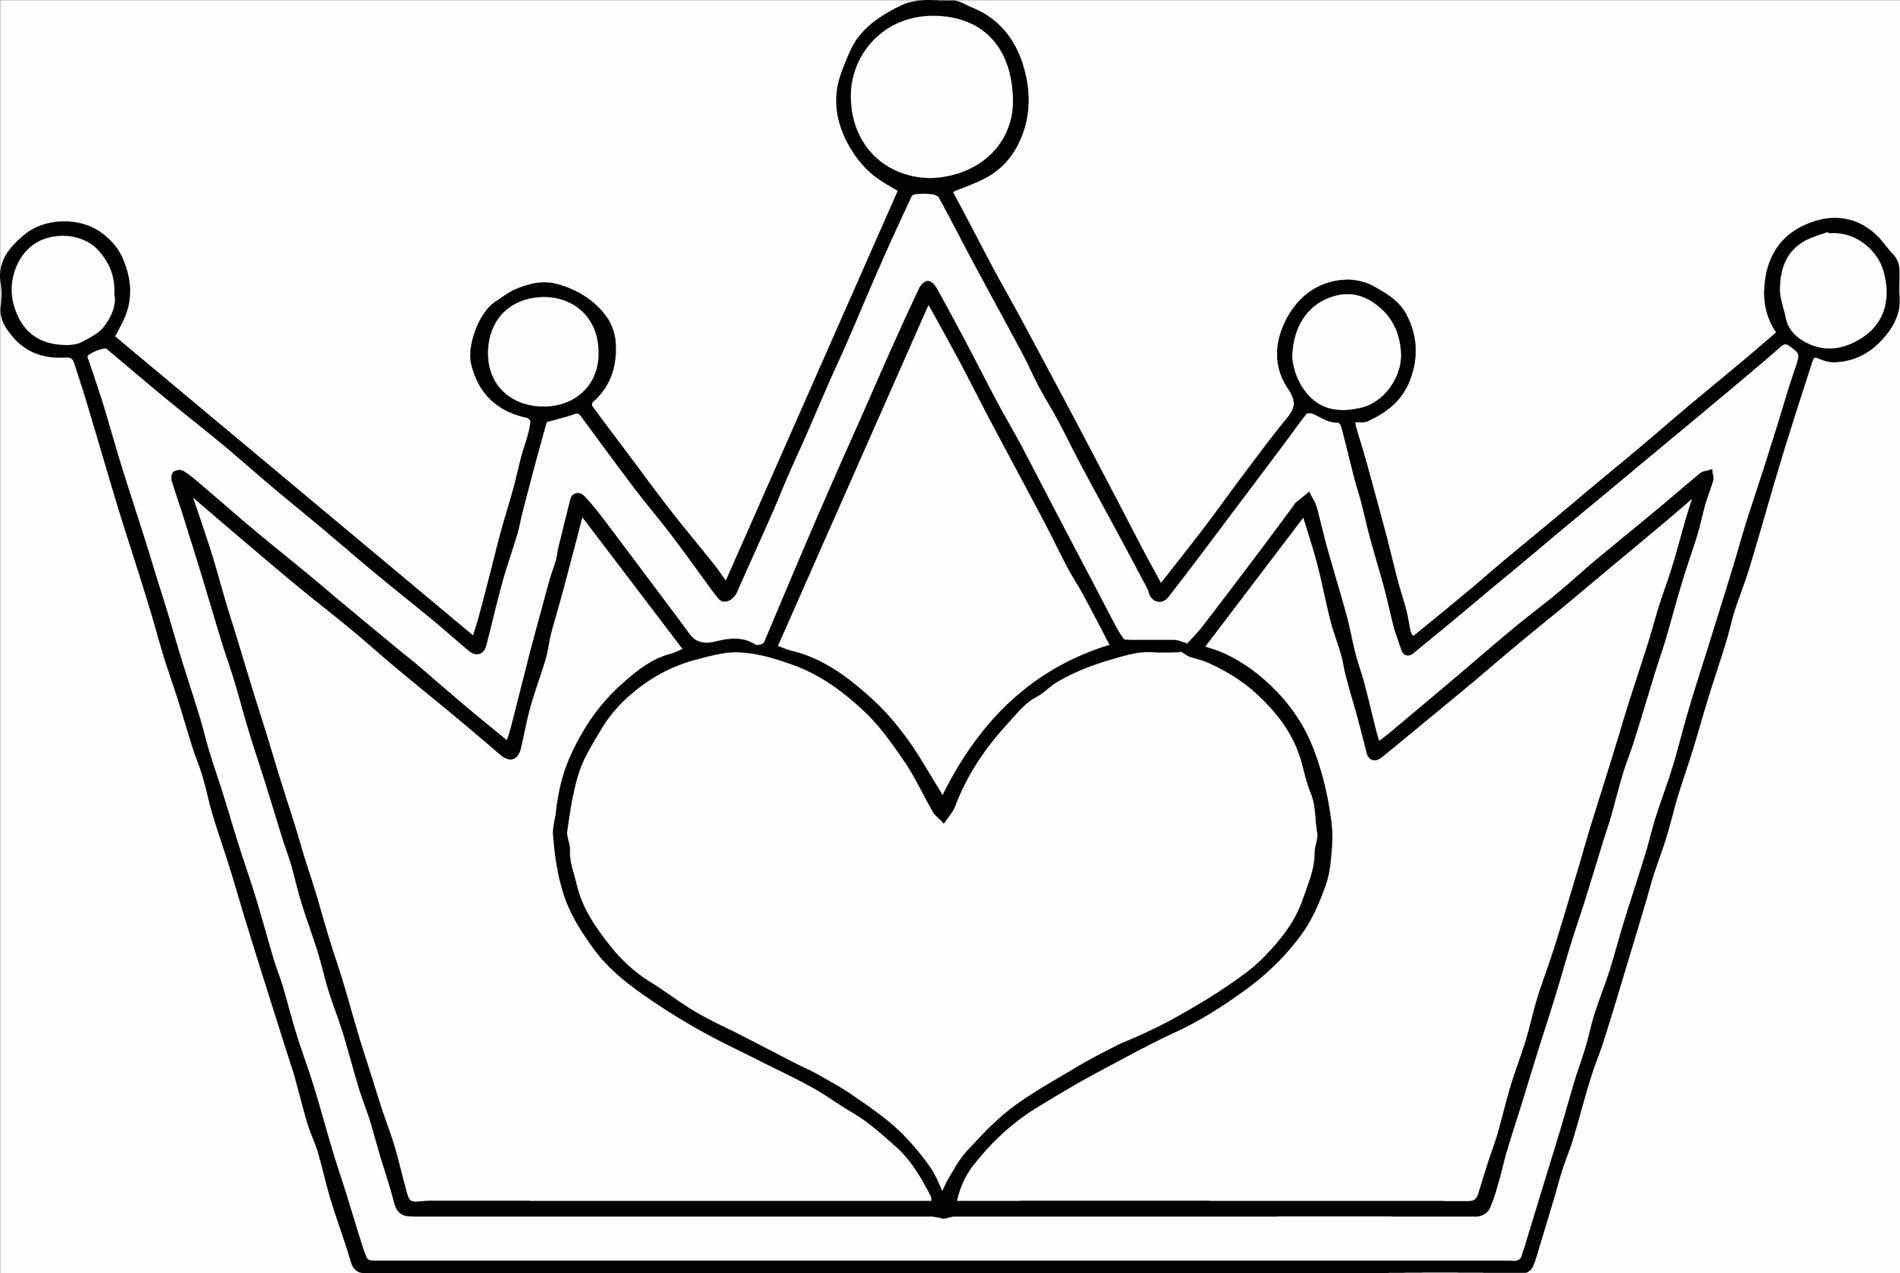 Crown Coloring Pages Printable
 Princess Crown Coloring Page – Through the thousands of